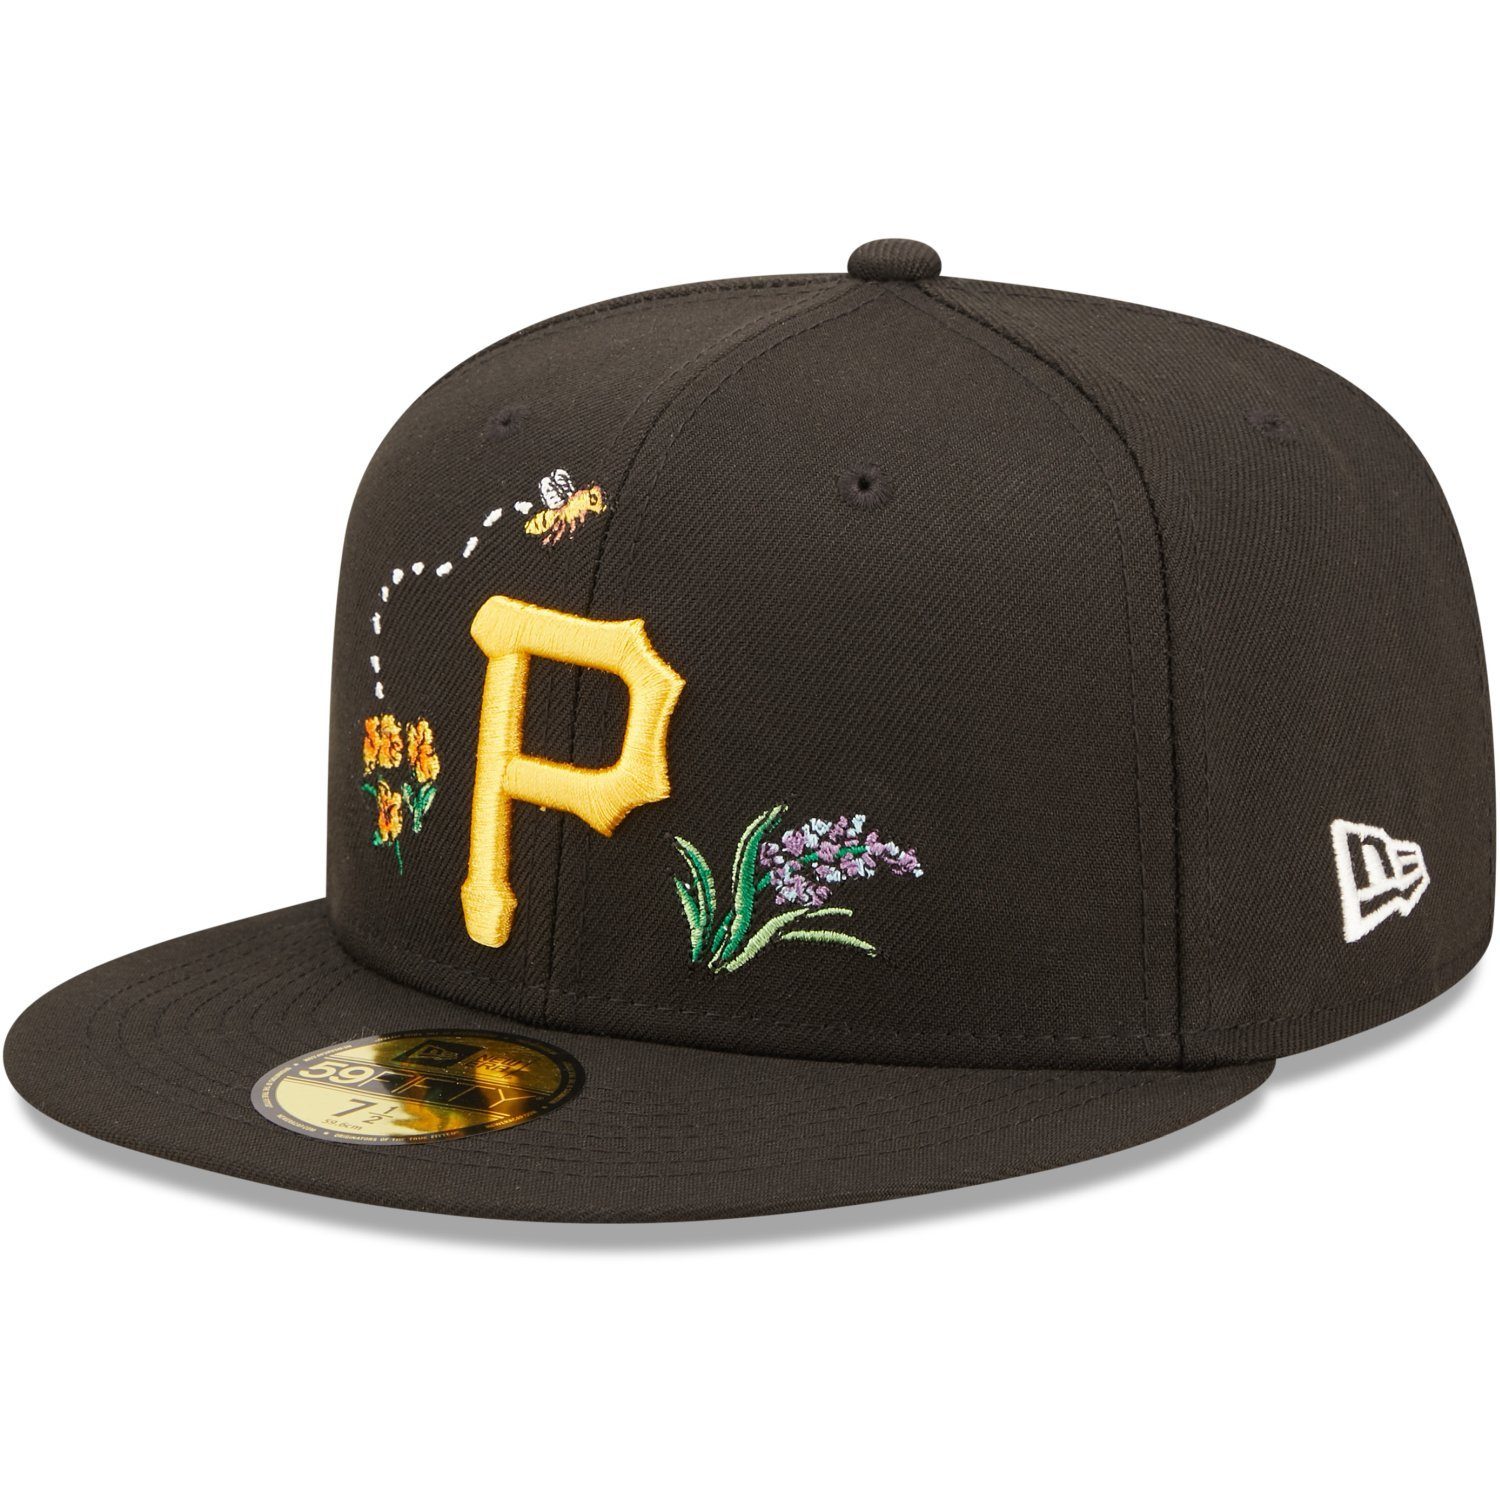 New Era Fitted Cap 59Fifty WATER FLORAL Pittsburgh Pirates